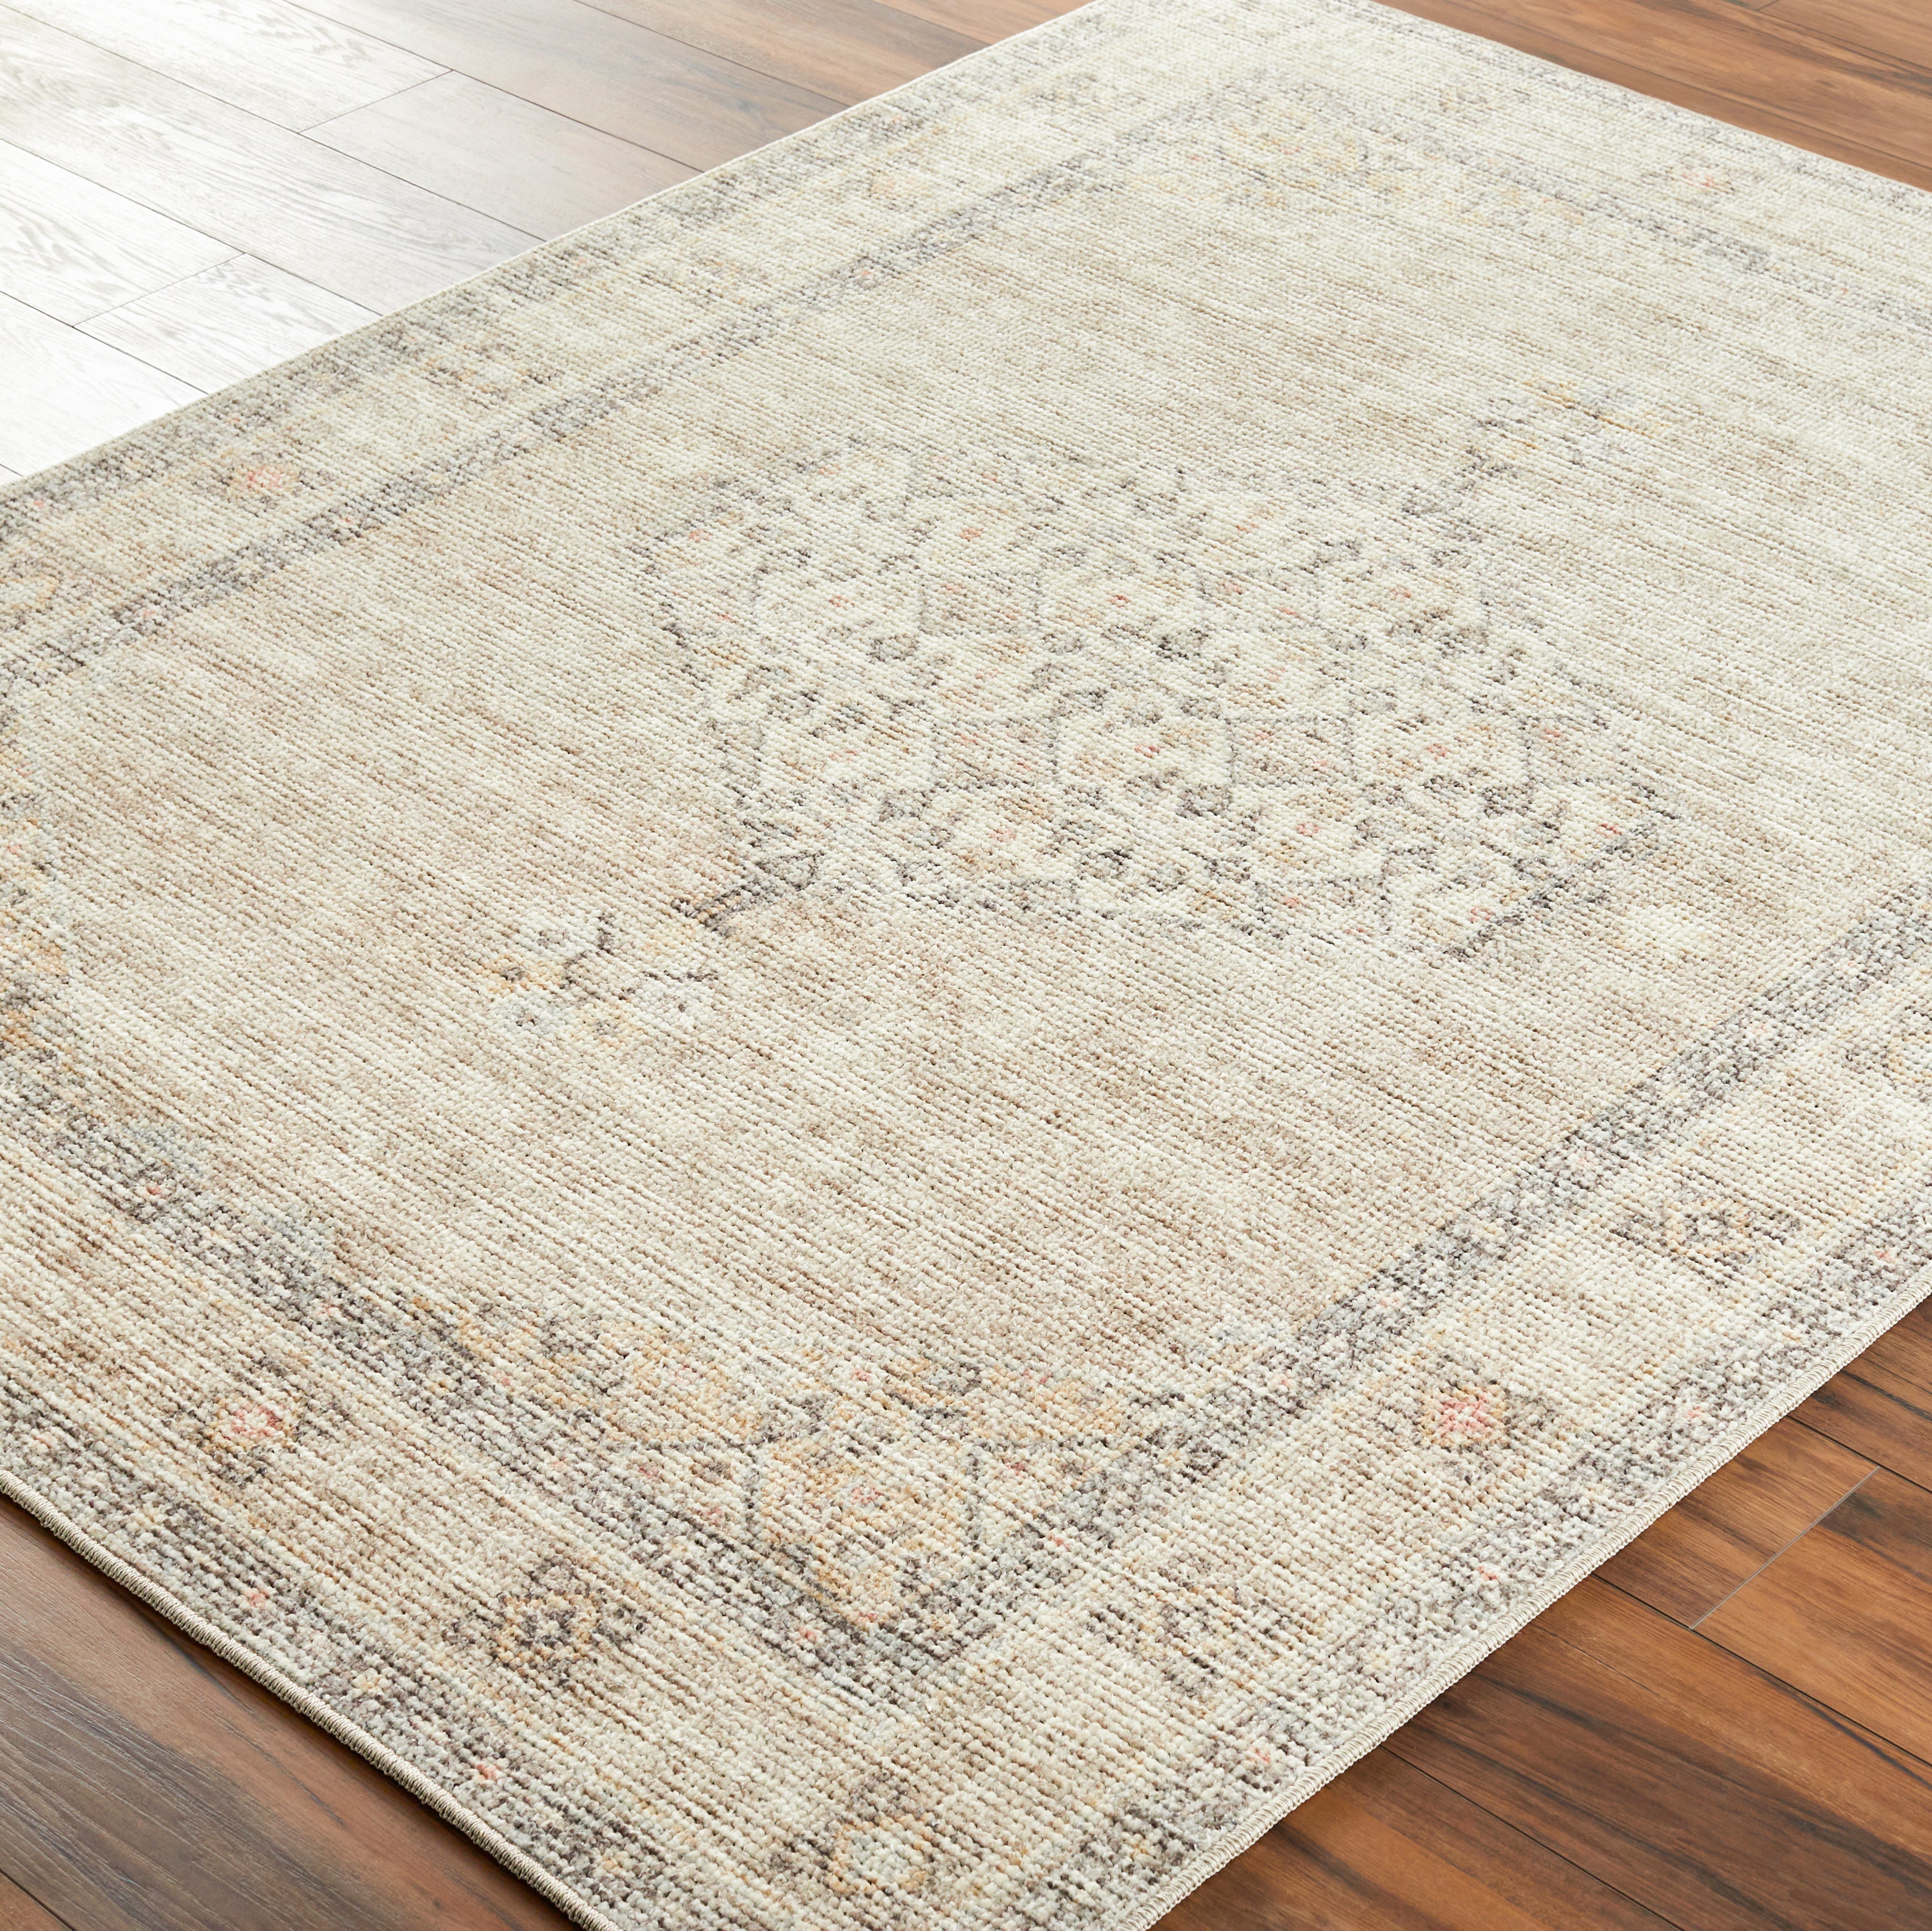 Brought to you by Becki Owens x Surya, the Lila Off White medallion area rug combines rich, detailed design with warm soft neutrals and tones to create an inviting space that will always feel familiar. Amethyst Home provides interior design, new construction, custom furniture, and area rugs in the Miami metro area.